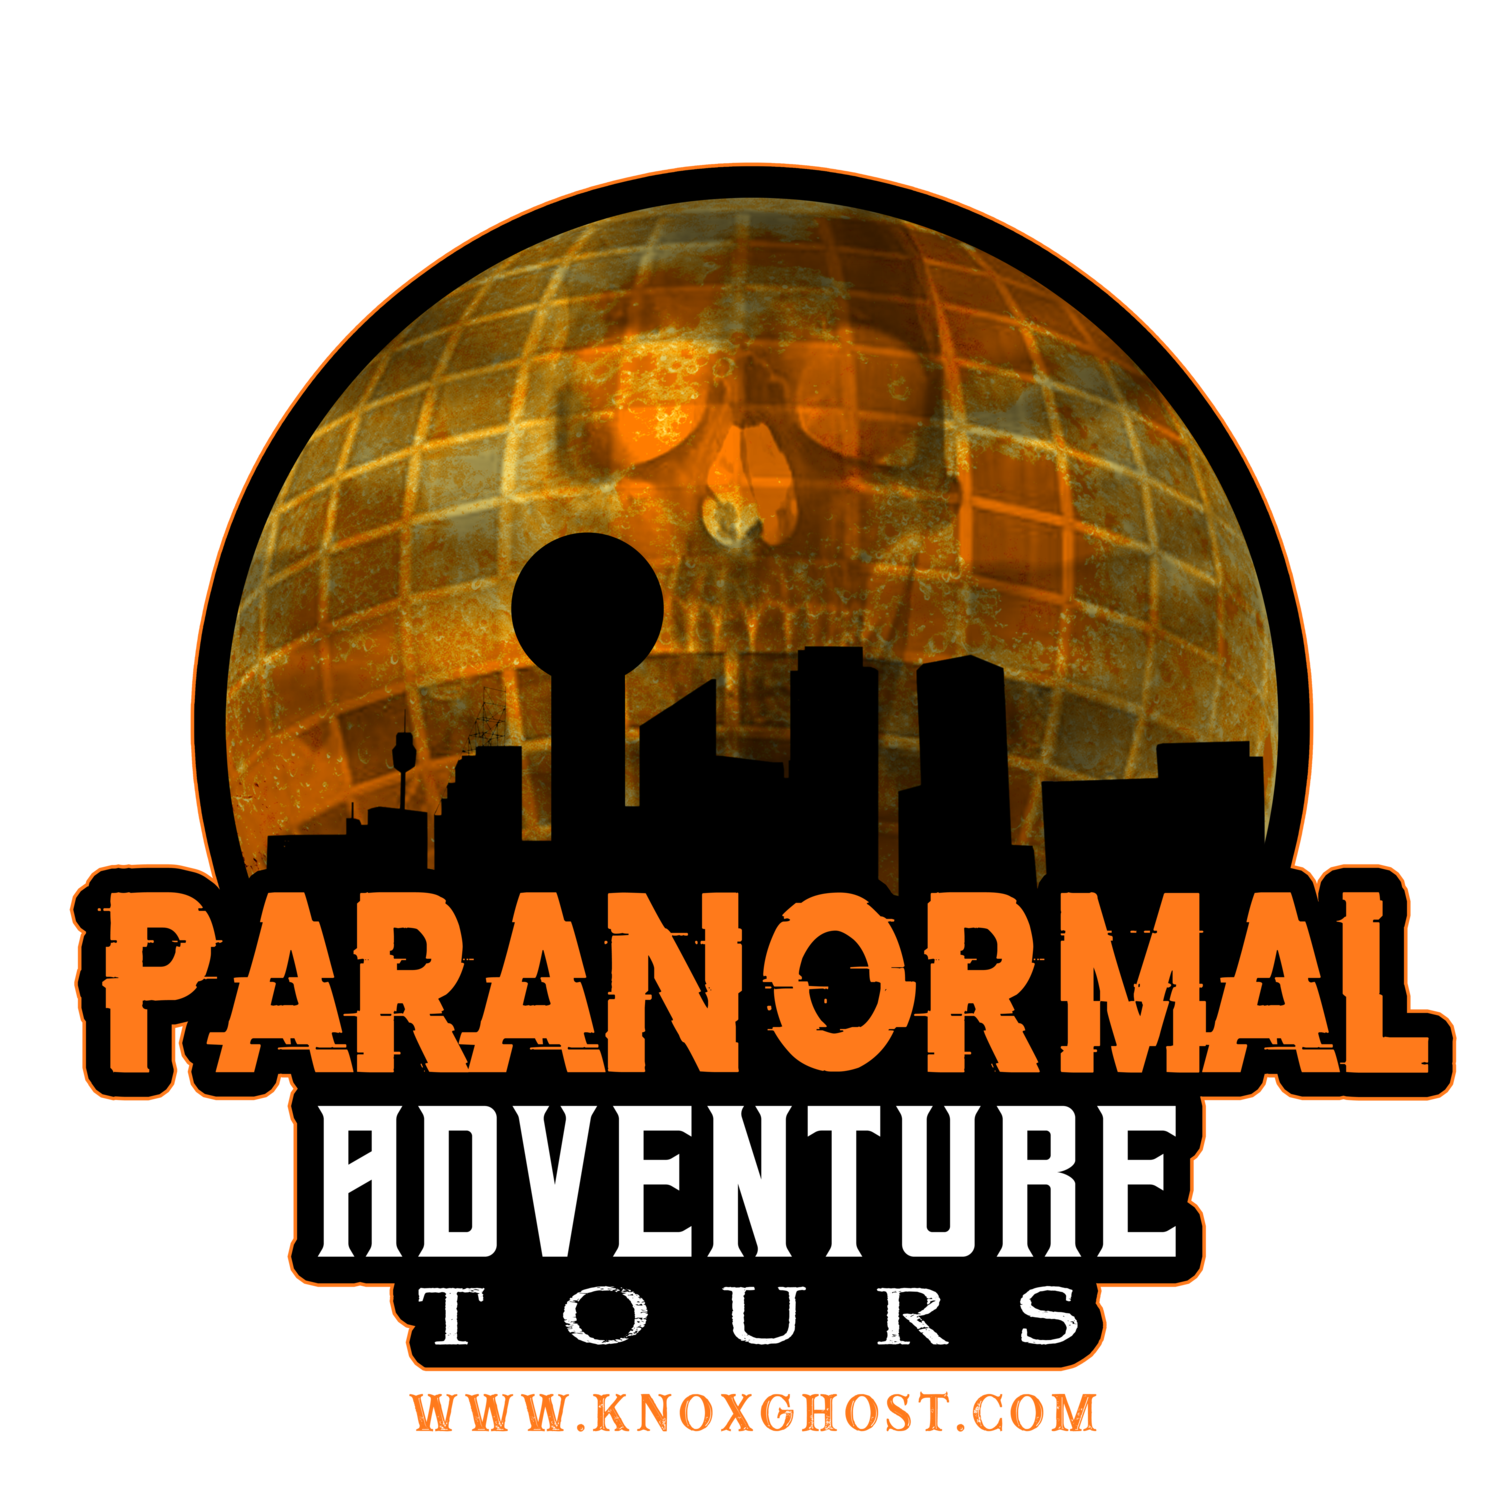 Haunted Knoxville Ghost Tours | Paranormal Adventures